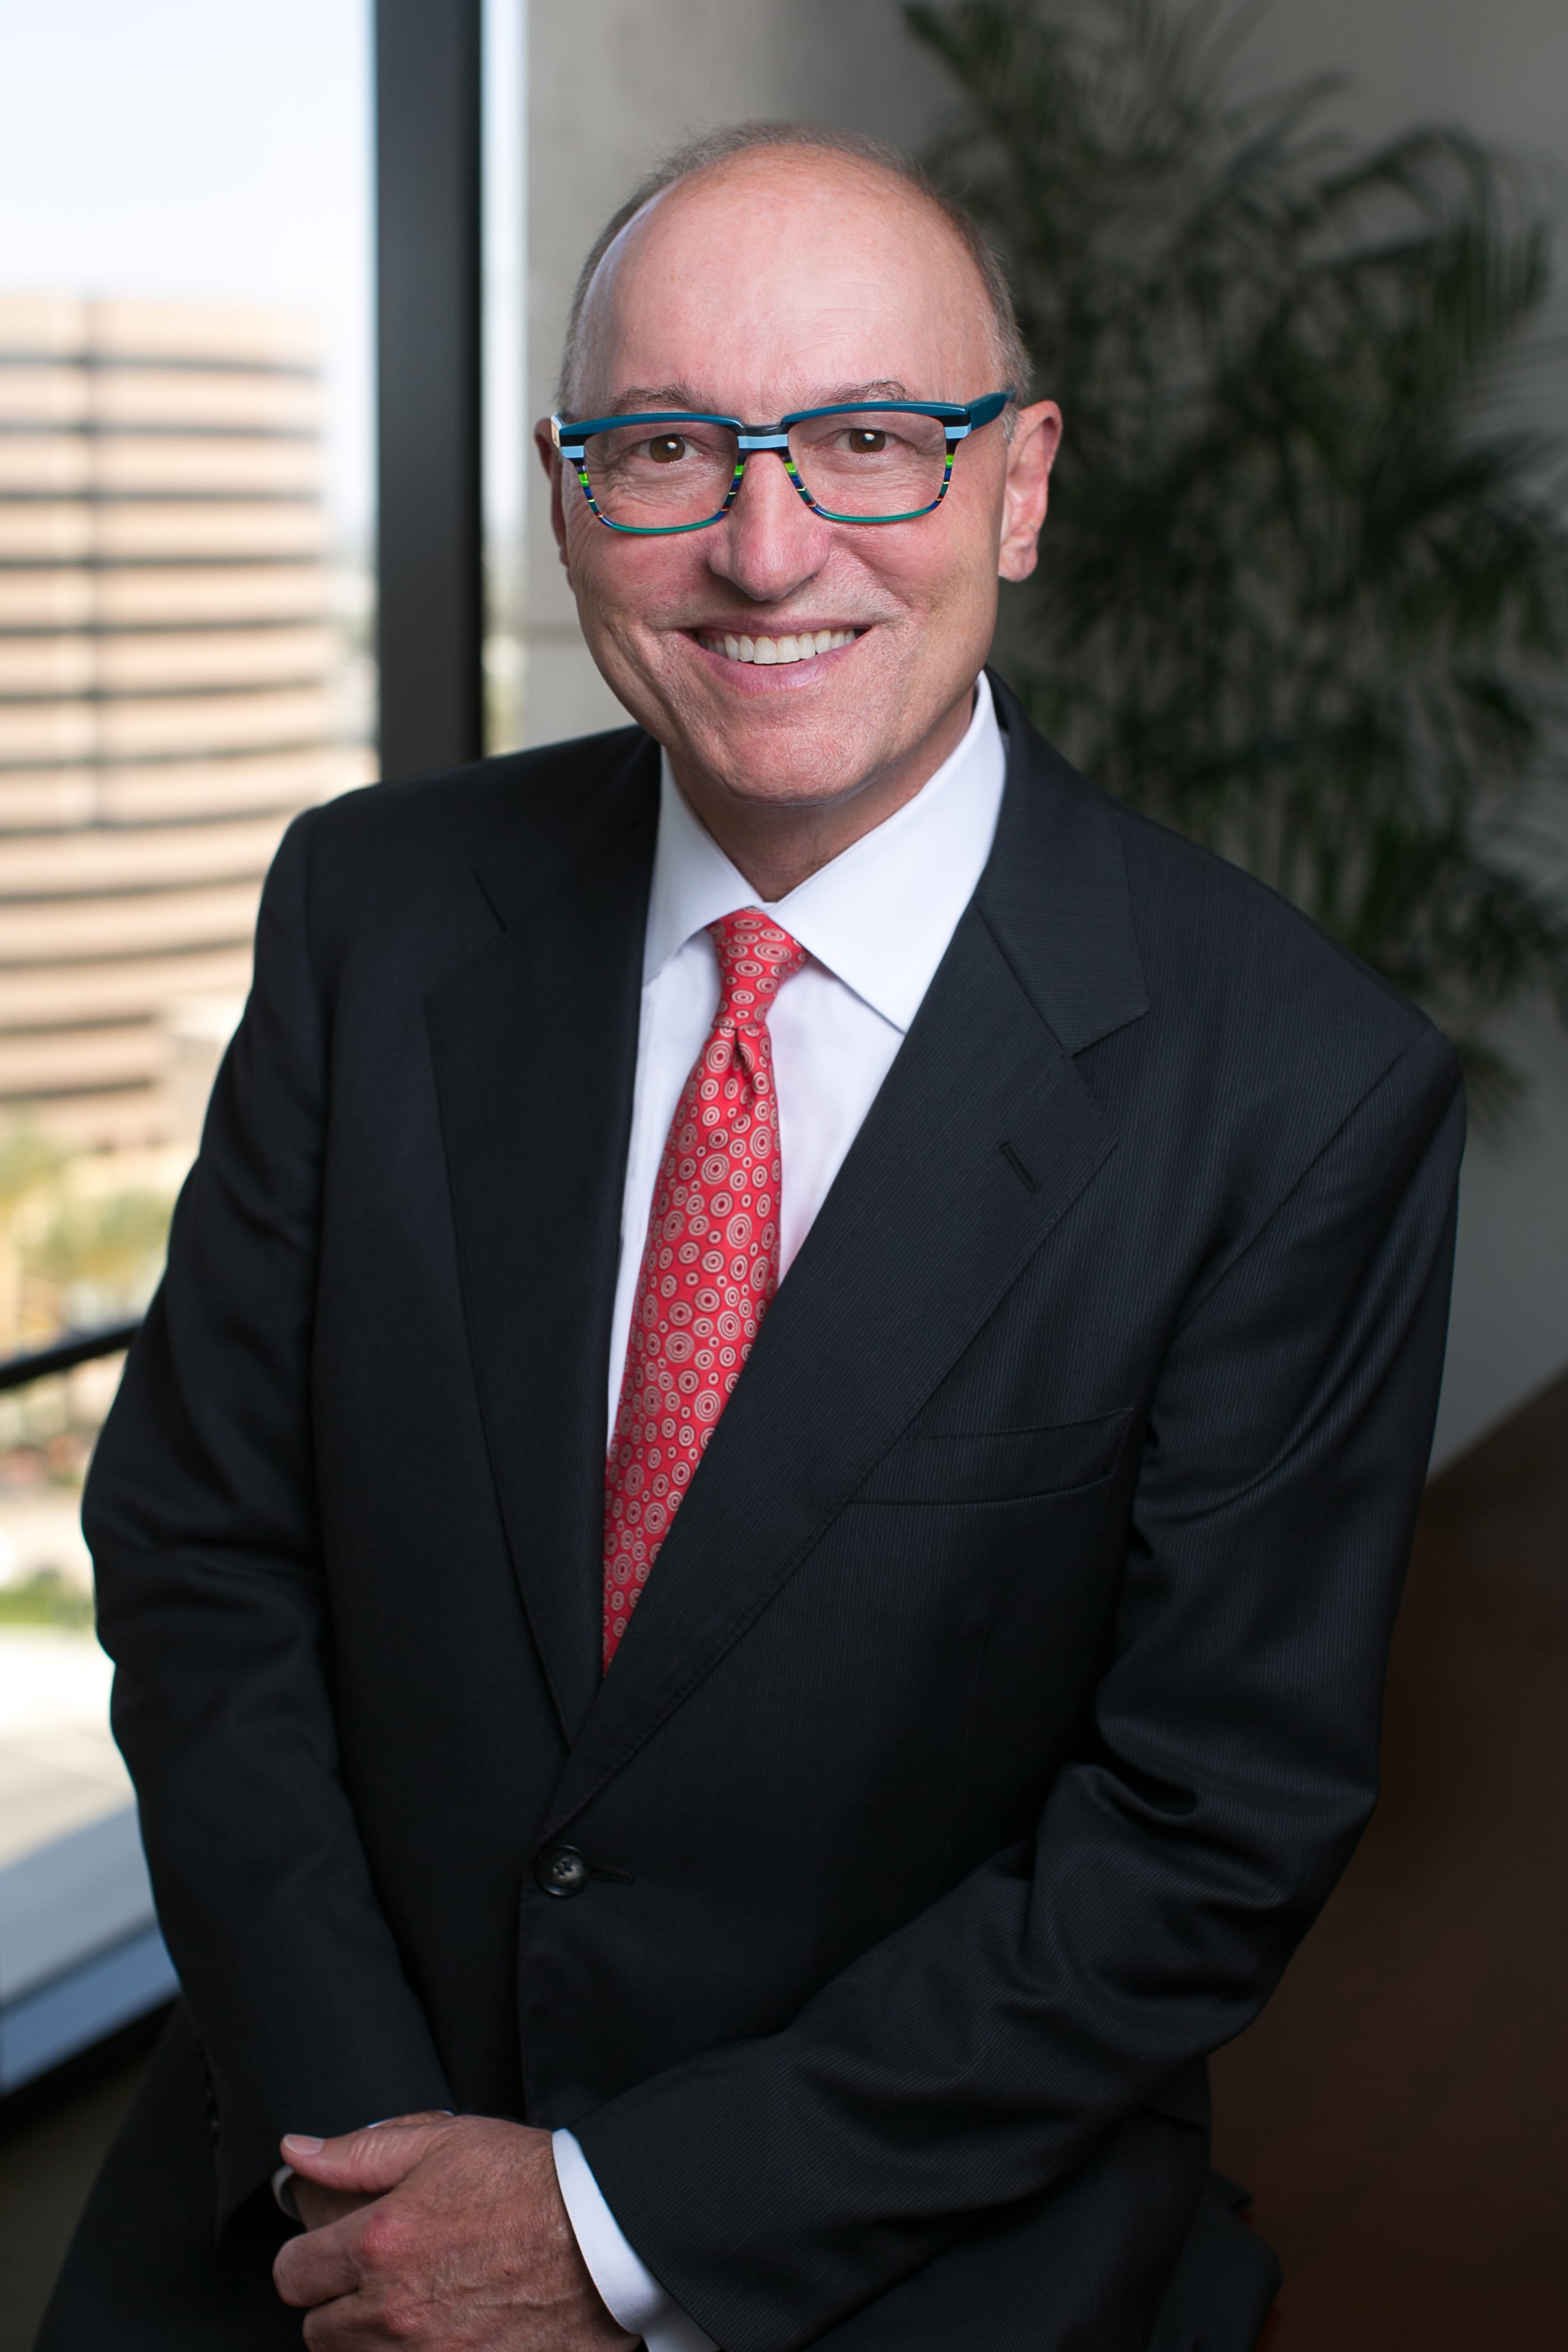 William A. Shopoff, President and Chief Executive Officer